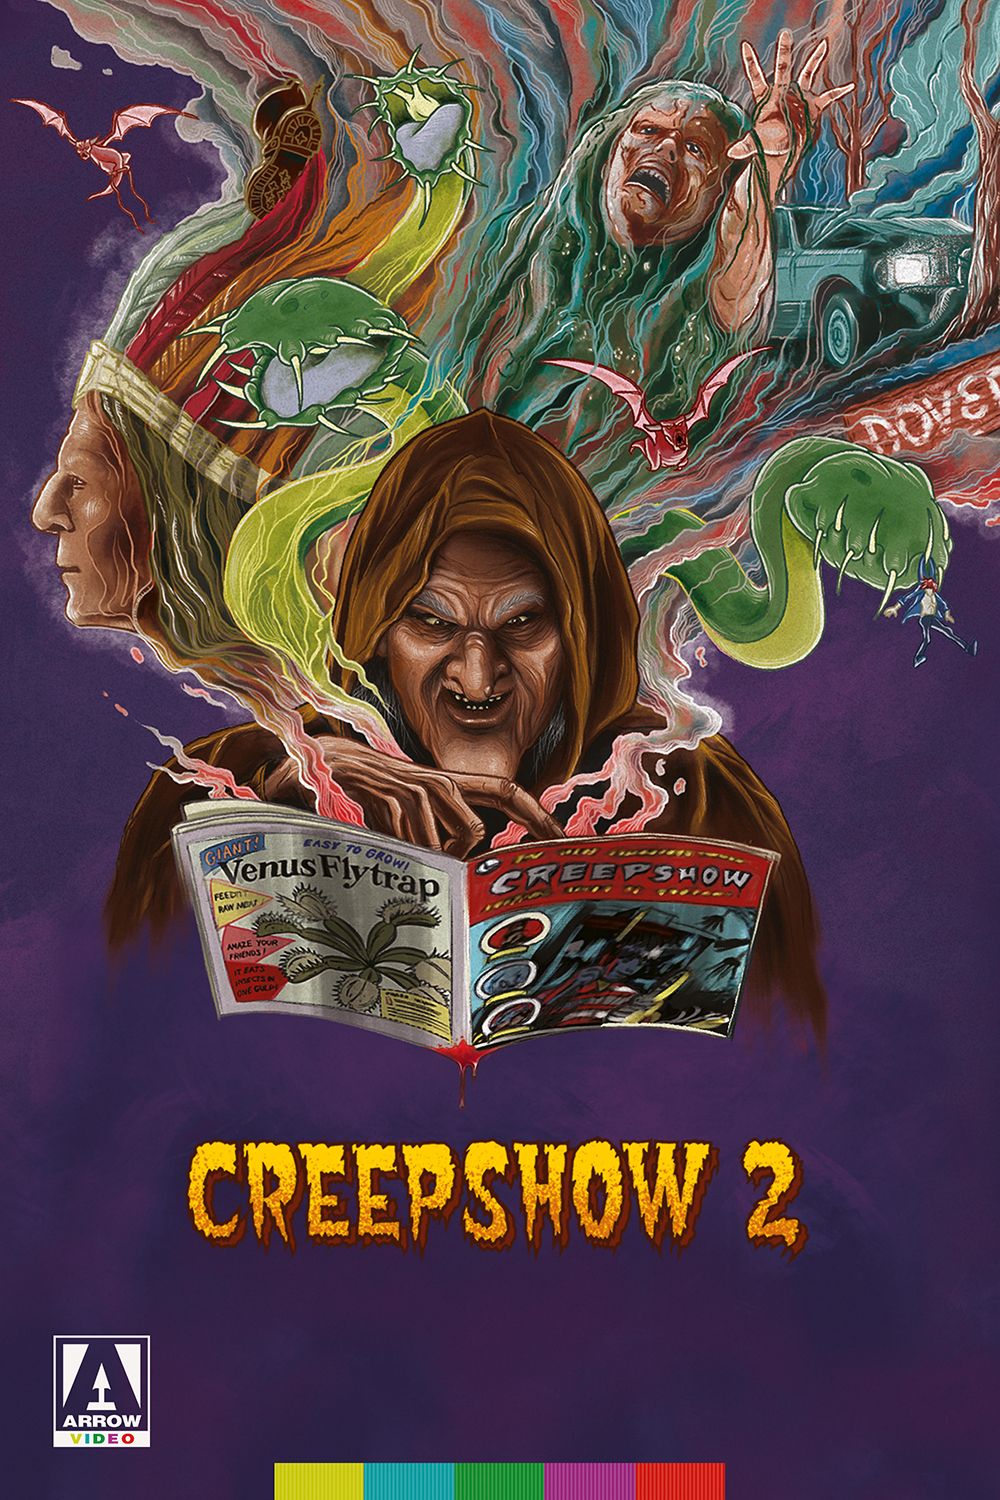 Creepshow 2 on Arrow Video Channel - Streaming July 2020